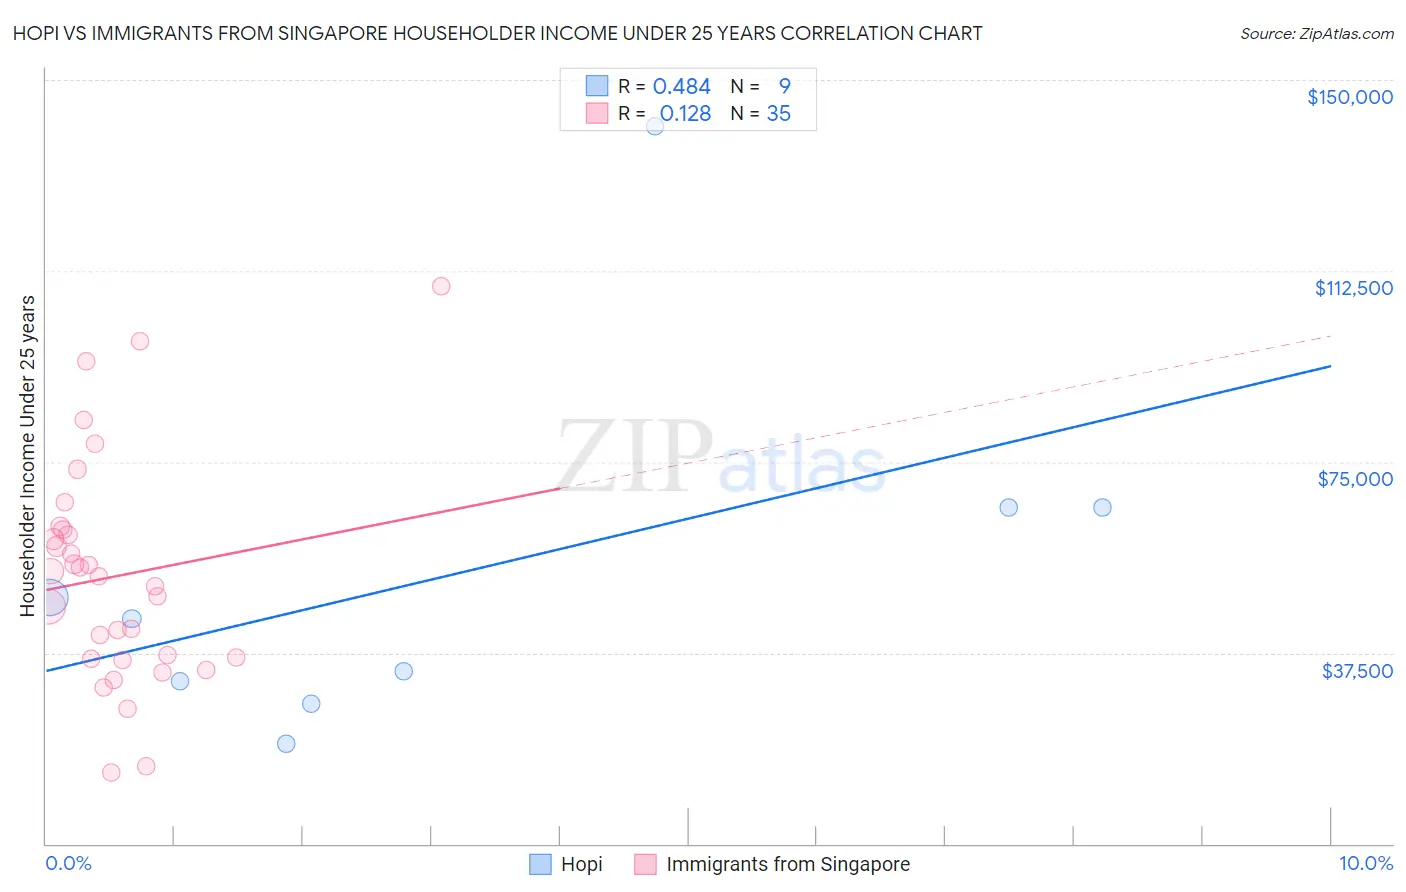 Hopi vs Immigrants from Singapore Householder Income Under 25 years